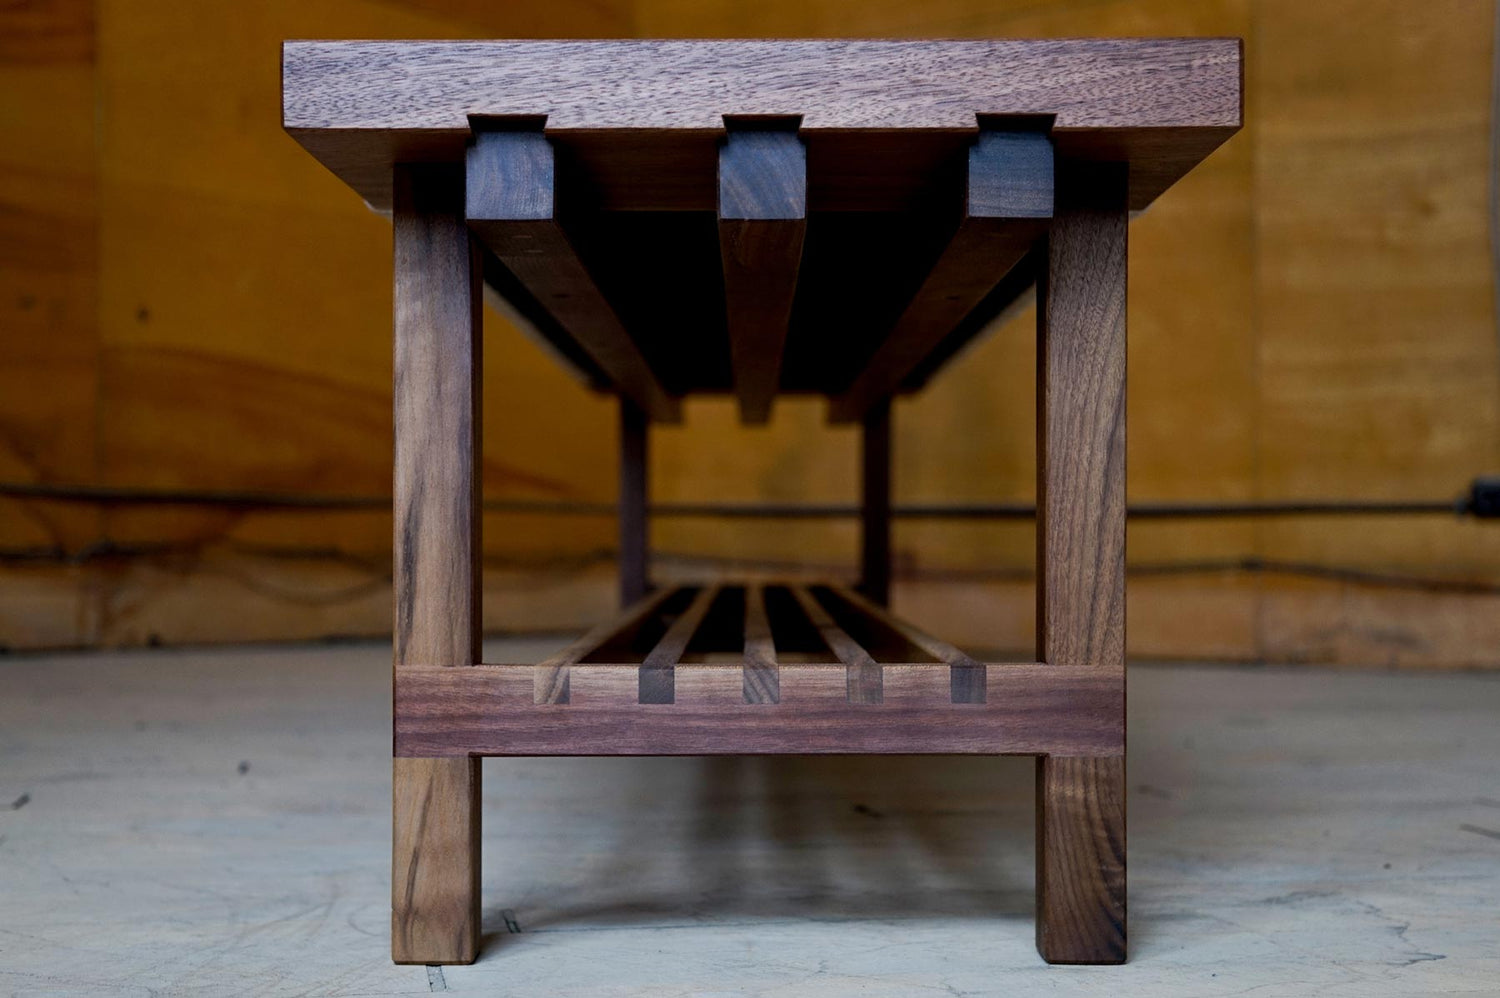 A side view of a custom walnut bench, showing some half lap joints for the lower shelf, and sliding dovetail rails that support the seat cushion.